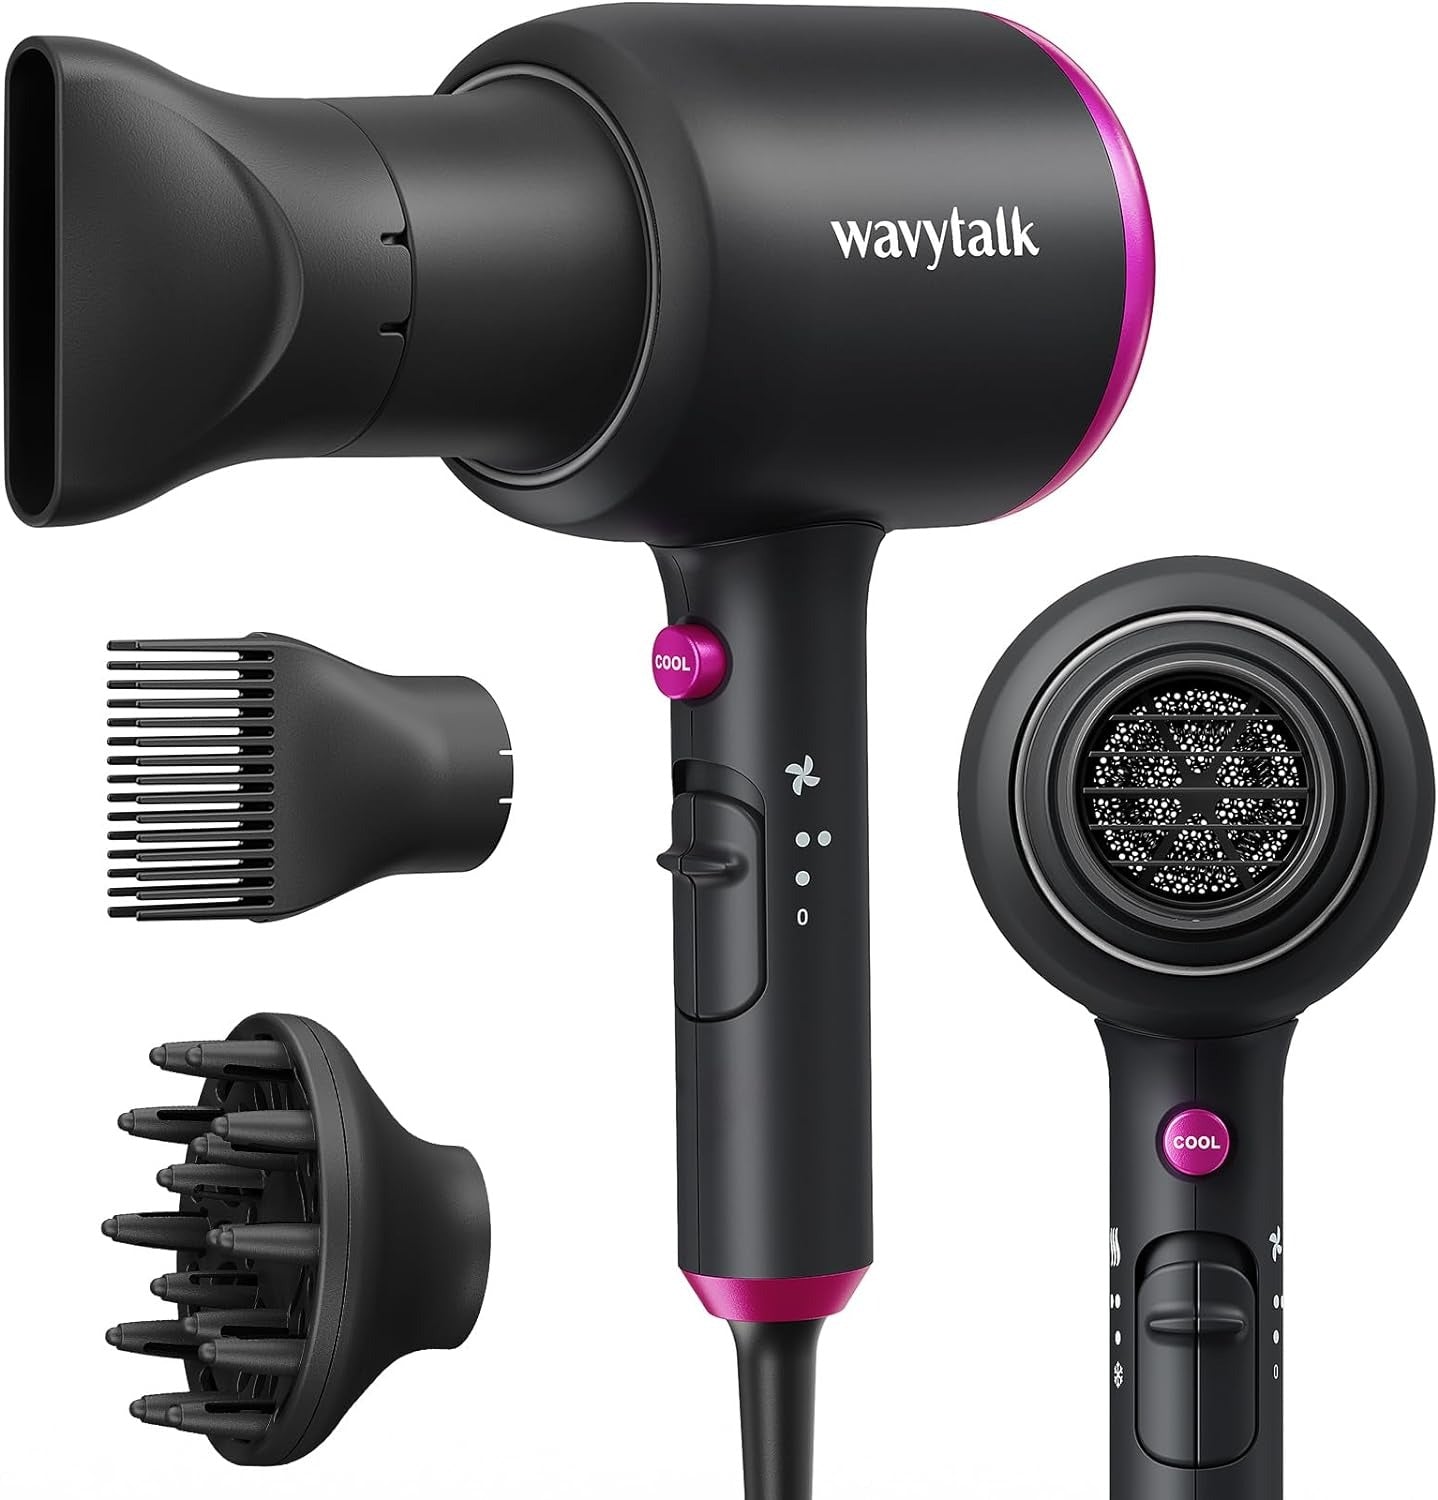 Professional Ionic Hair Dryer Blow Dryer with Diffuser and Concentrator for Curly Hair 1875 Watt Negative Ions Dryer with Ceramic Technology Nozzle for Fast Drying as Salon Light and Quiet